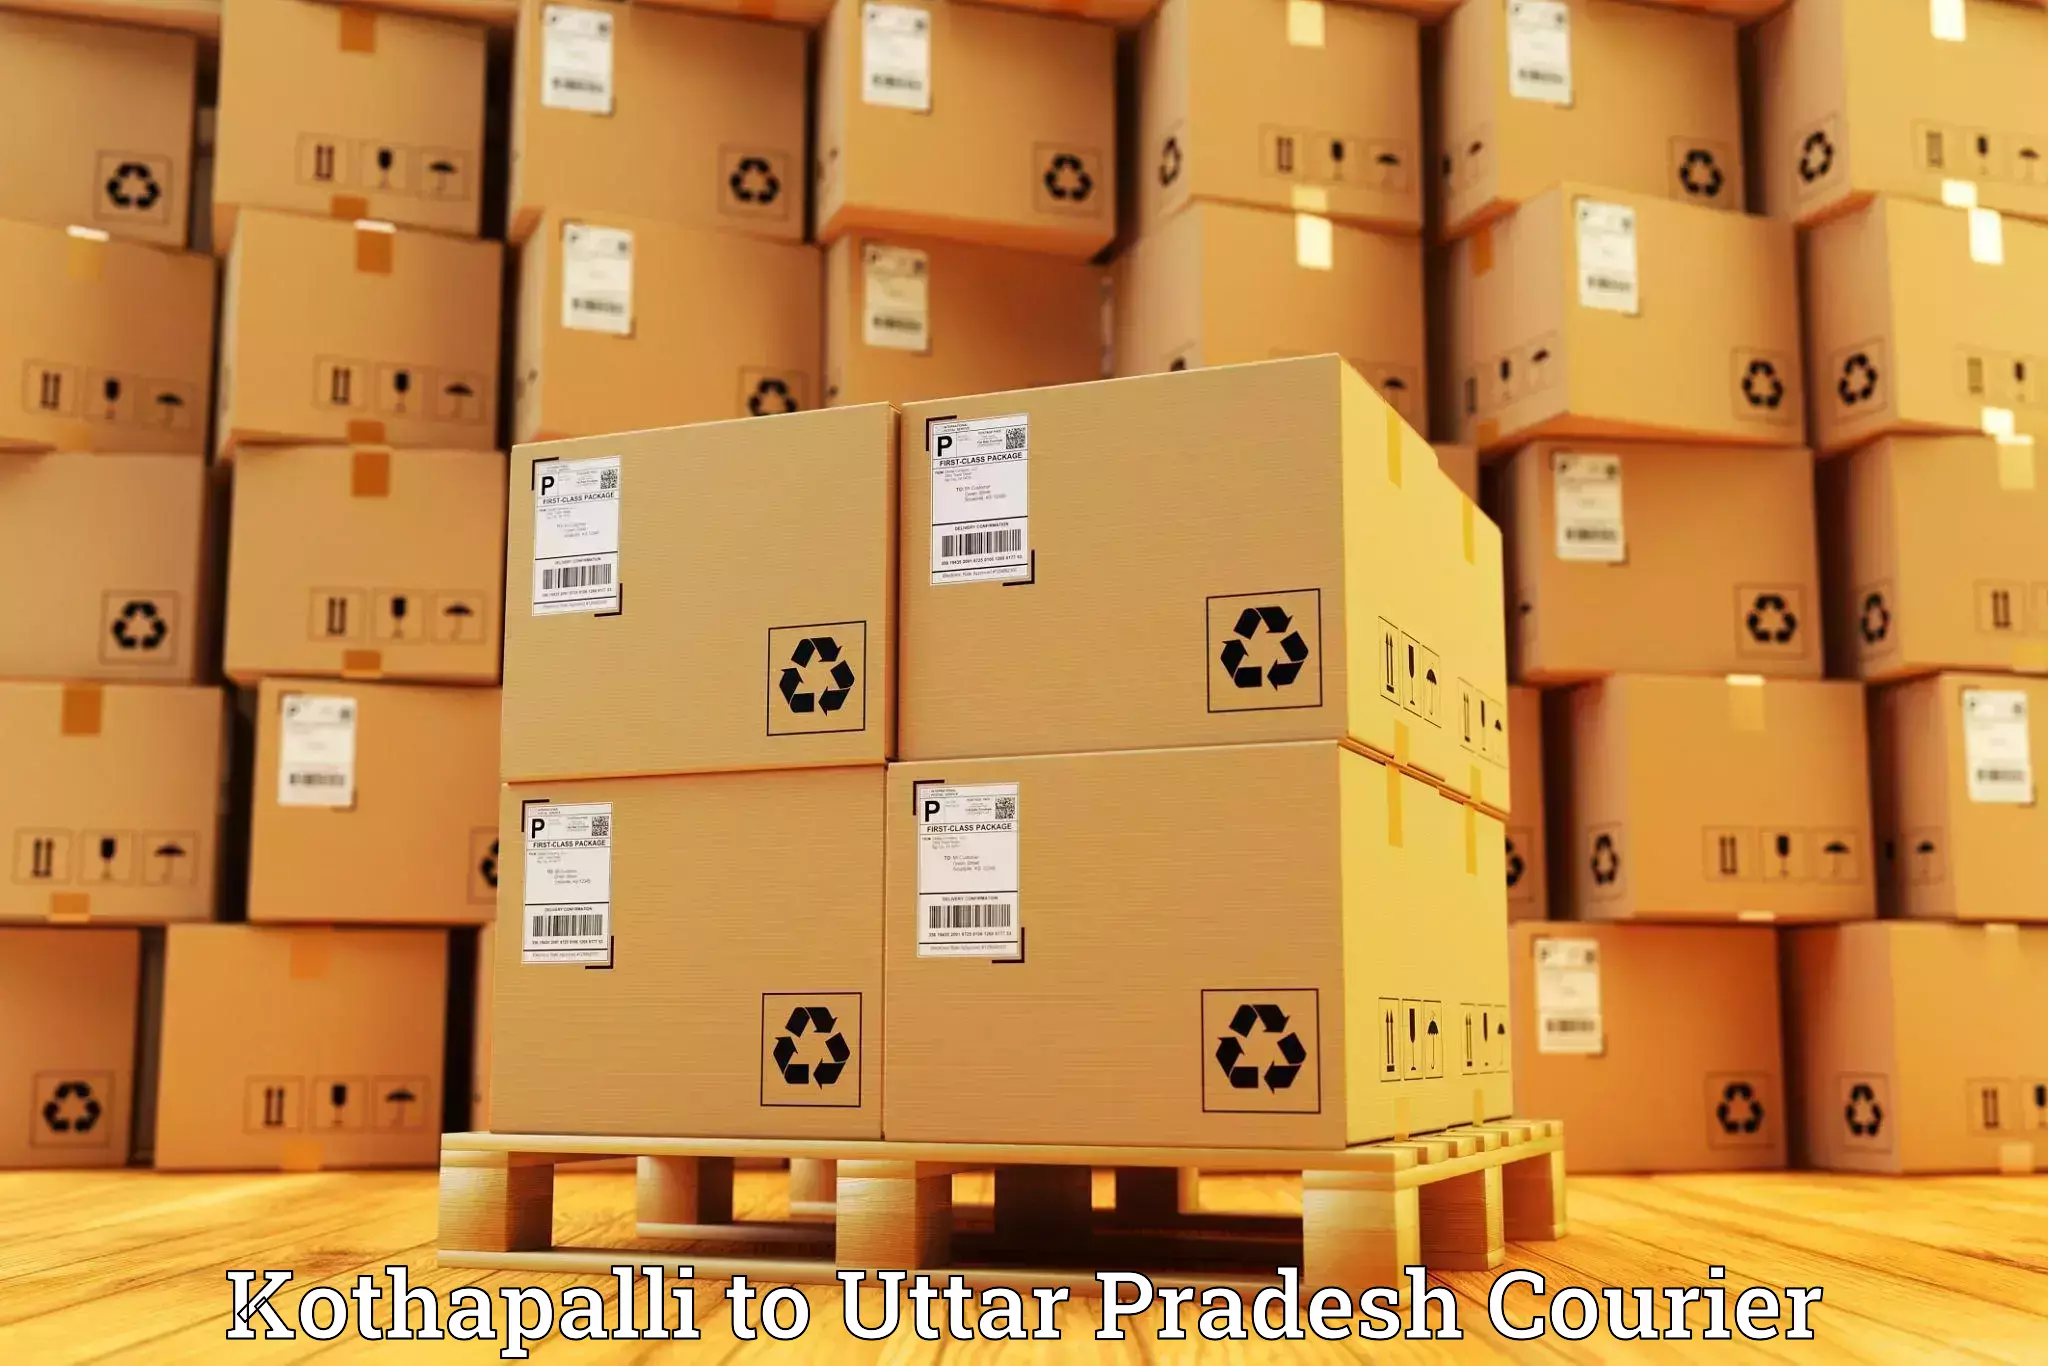 Multi-national courier services Kothapalli to Itwa